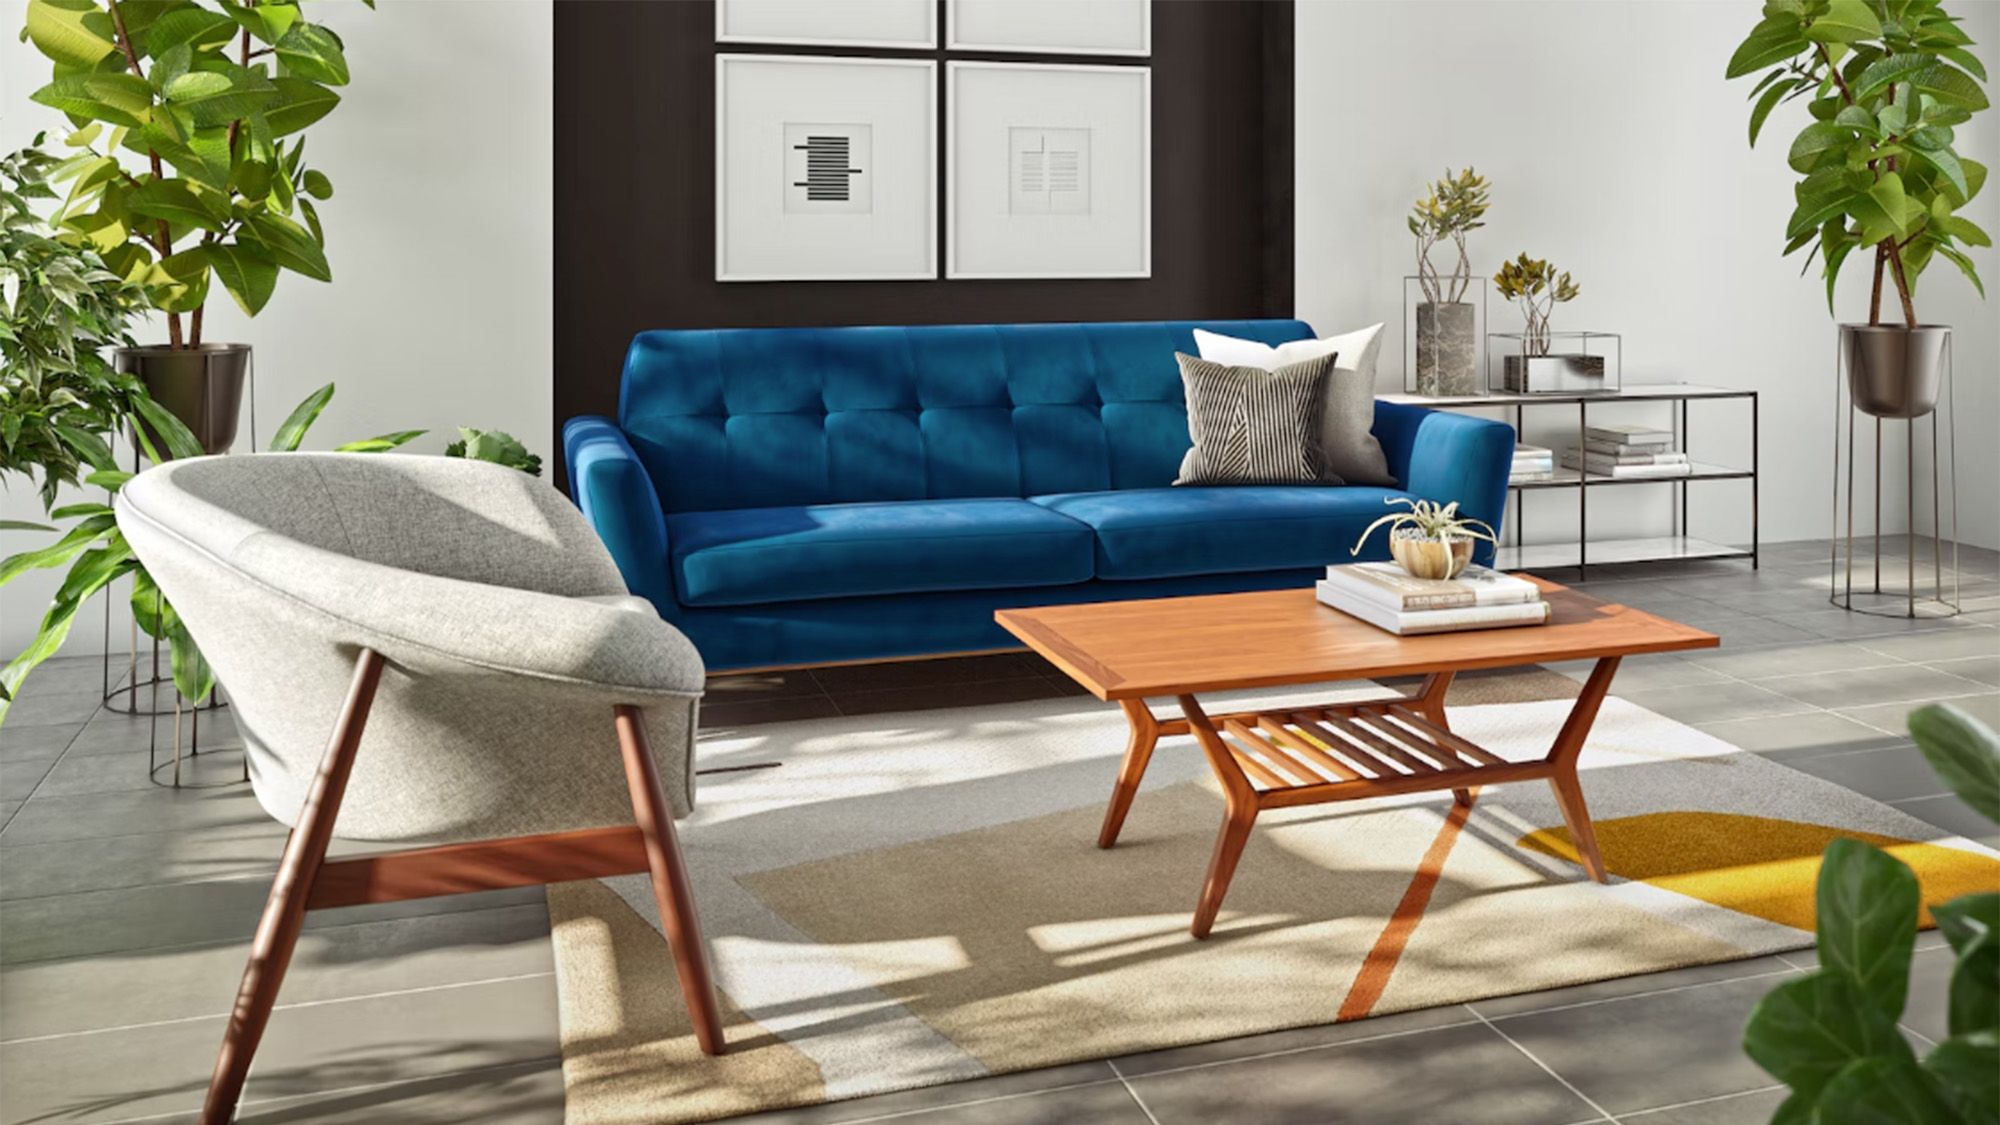 10 Sustainable Furniture Brands for the Eco-Friendly Home